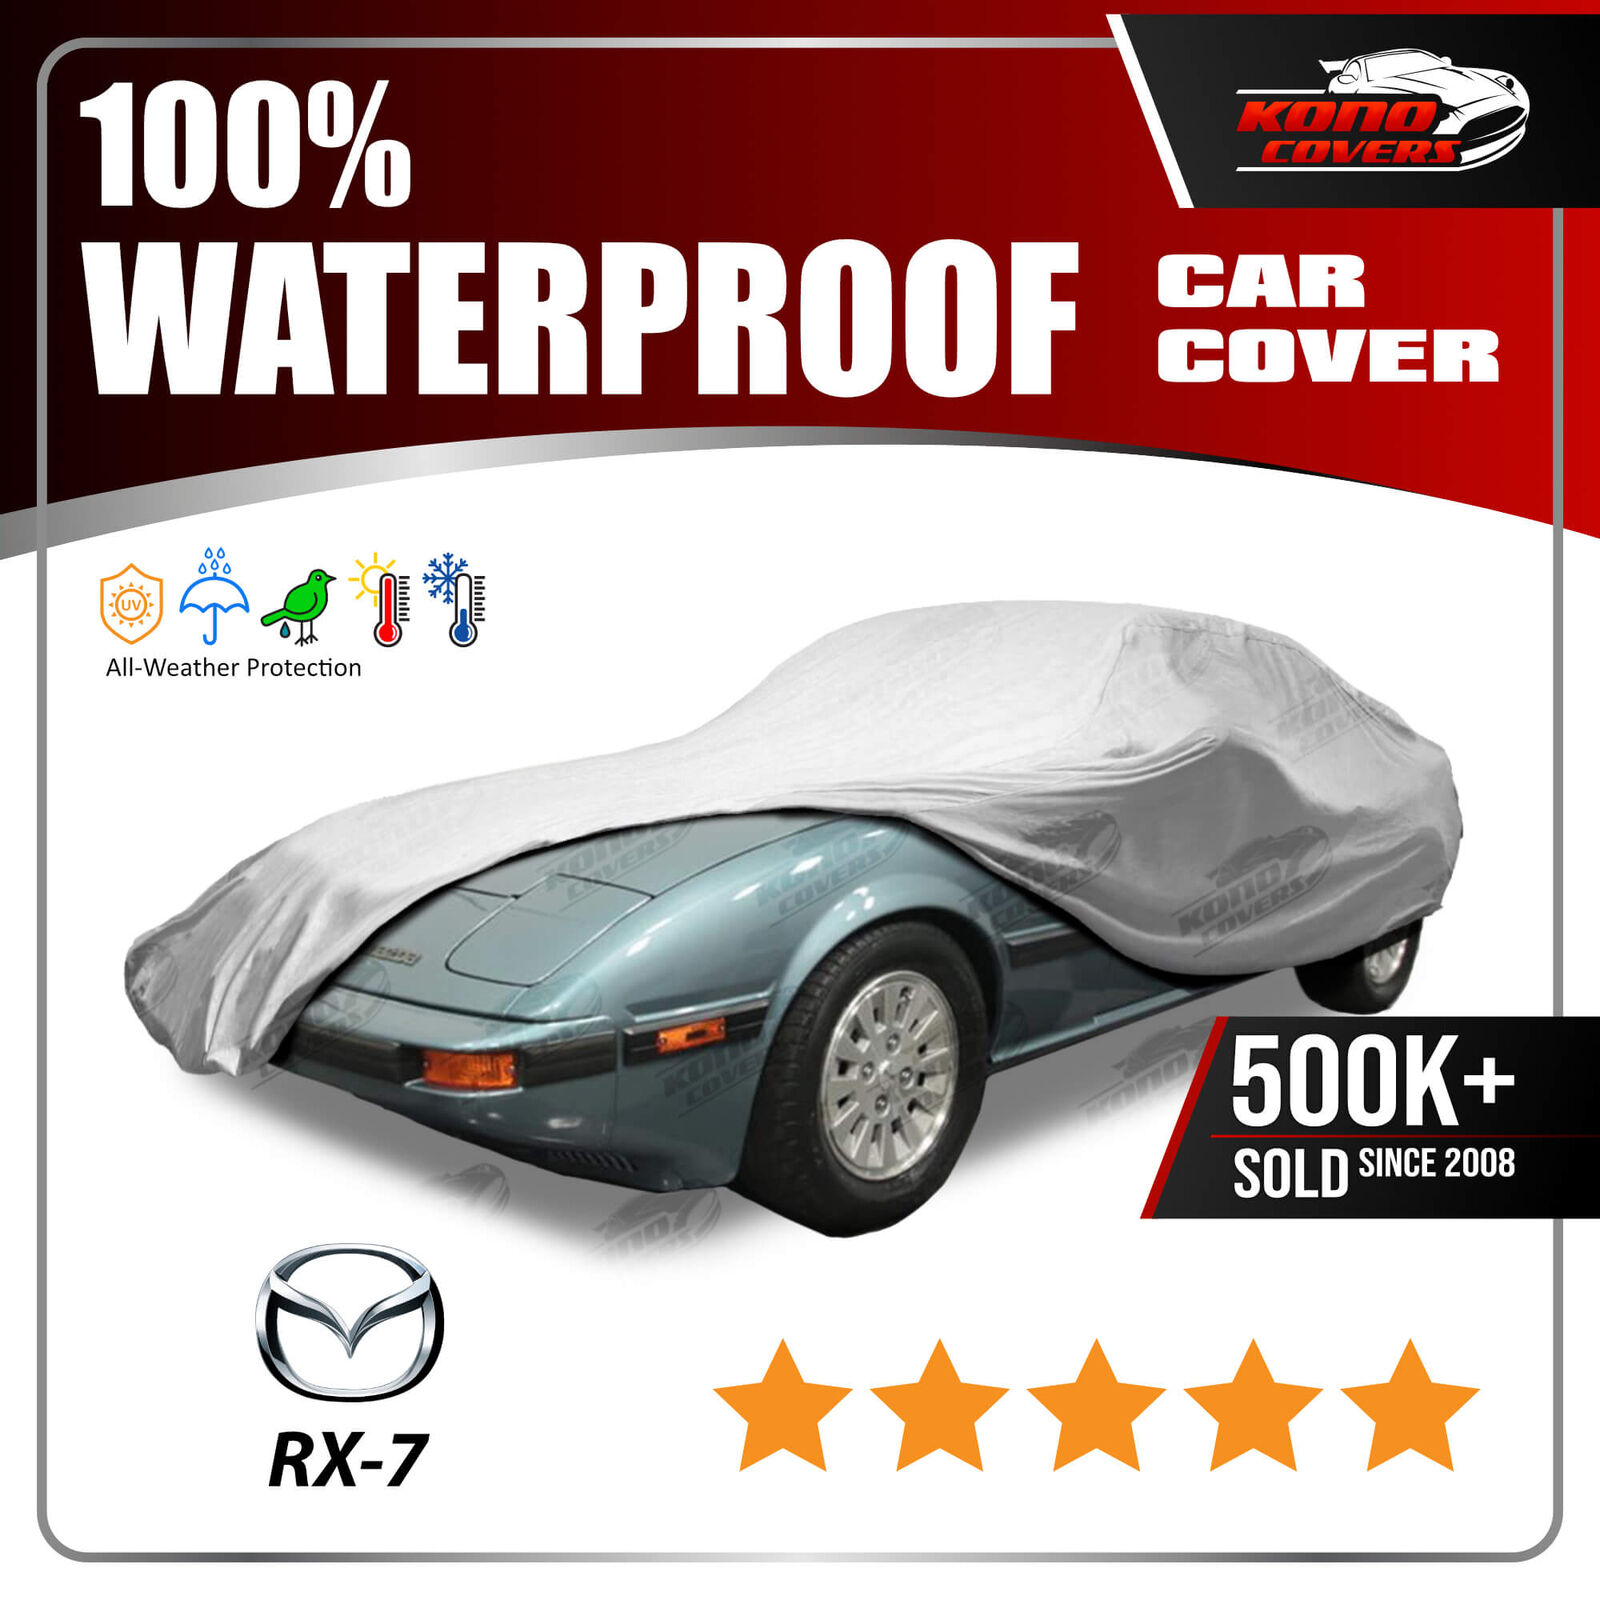 MAZDA RX-7 1978-1985 CAR COVER - 100% Waterproof 100% Breathable